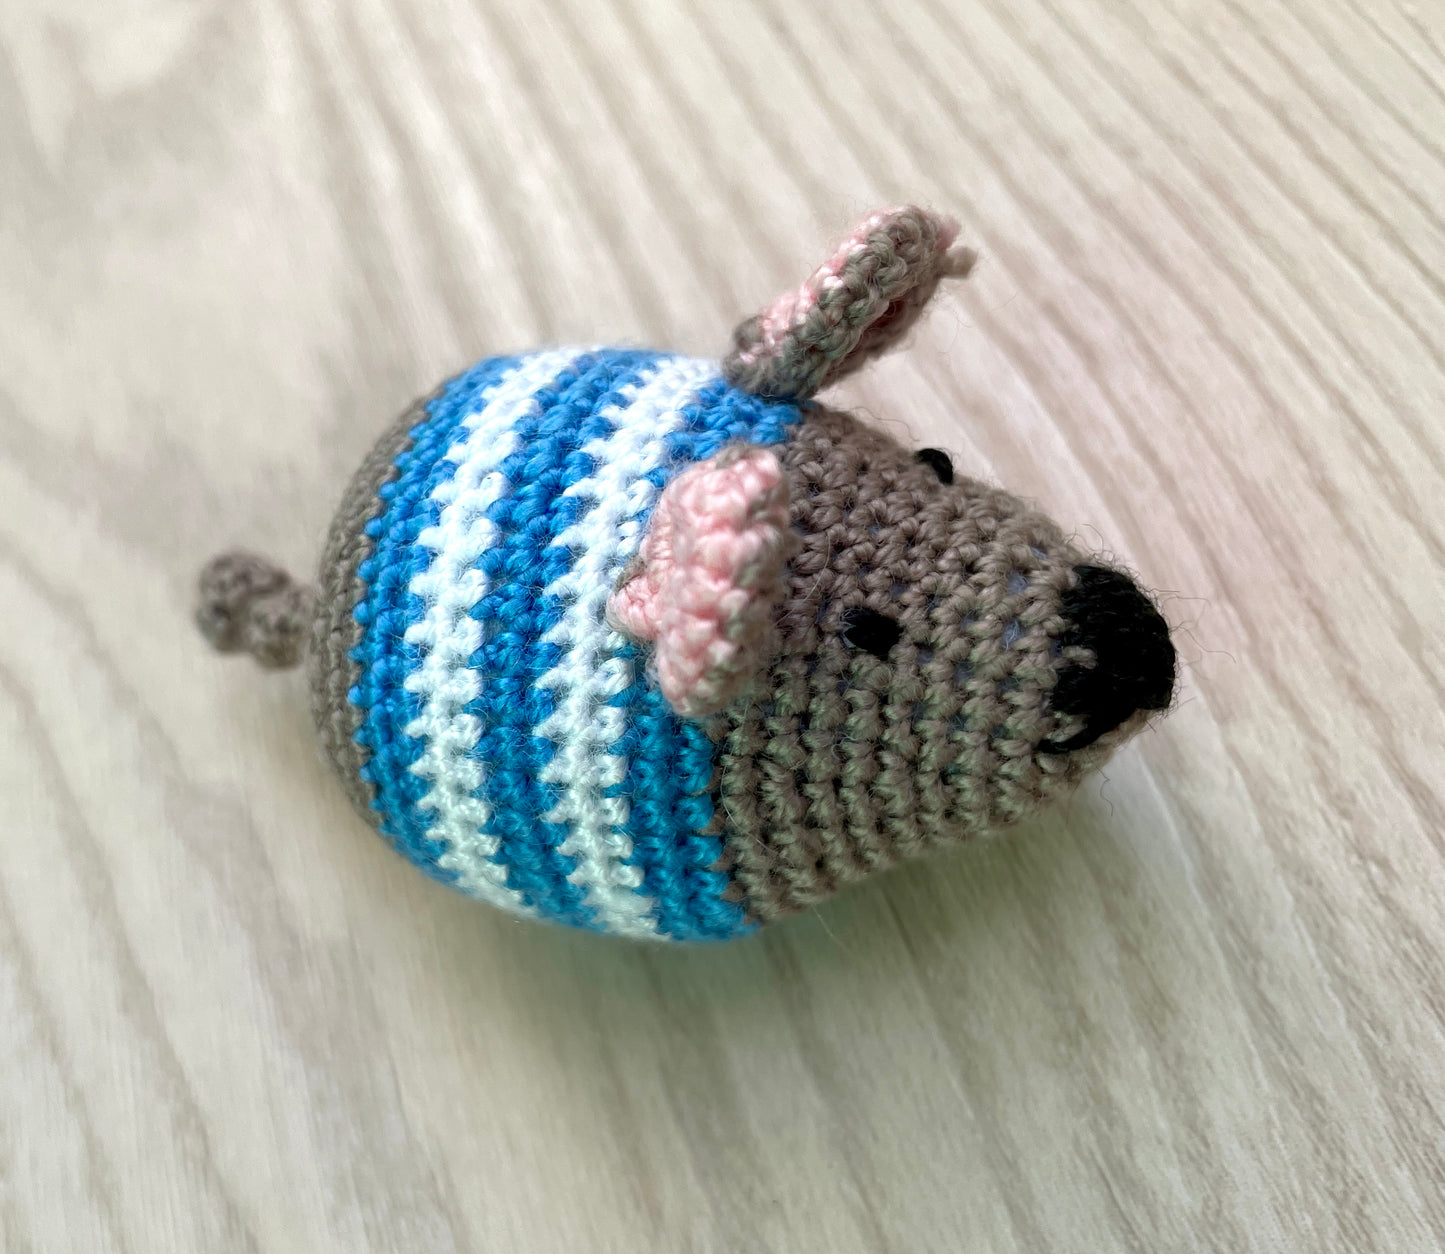 Crochet Catnip Mouse in Christmas Jumper, Cat Toy - 4 colours!